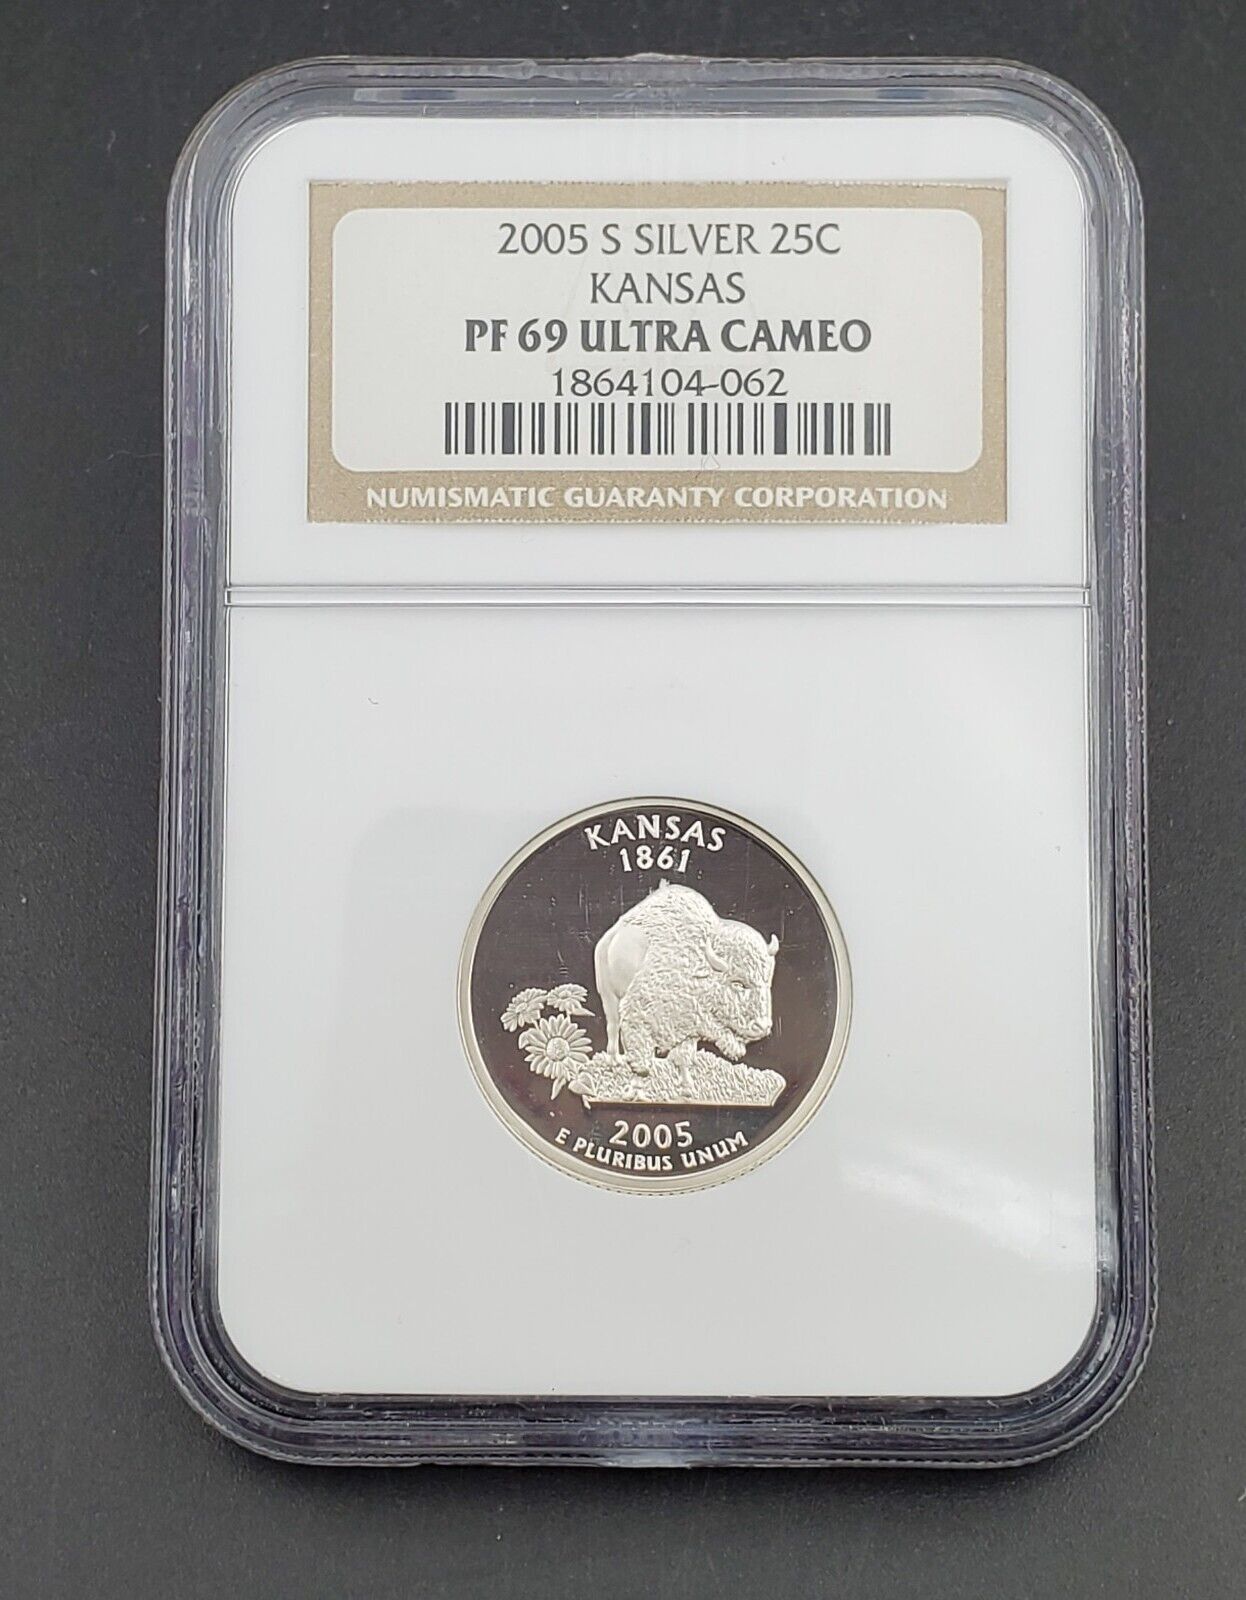 2005 S KANSAS State Statehood Silver Quarter Coin NGC PF69 Ultra Cameo #2